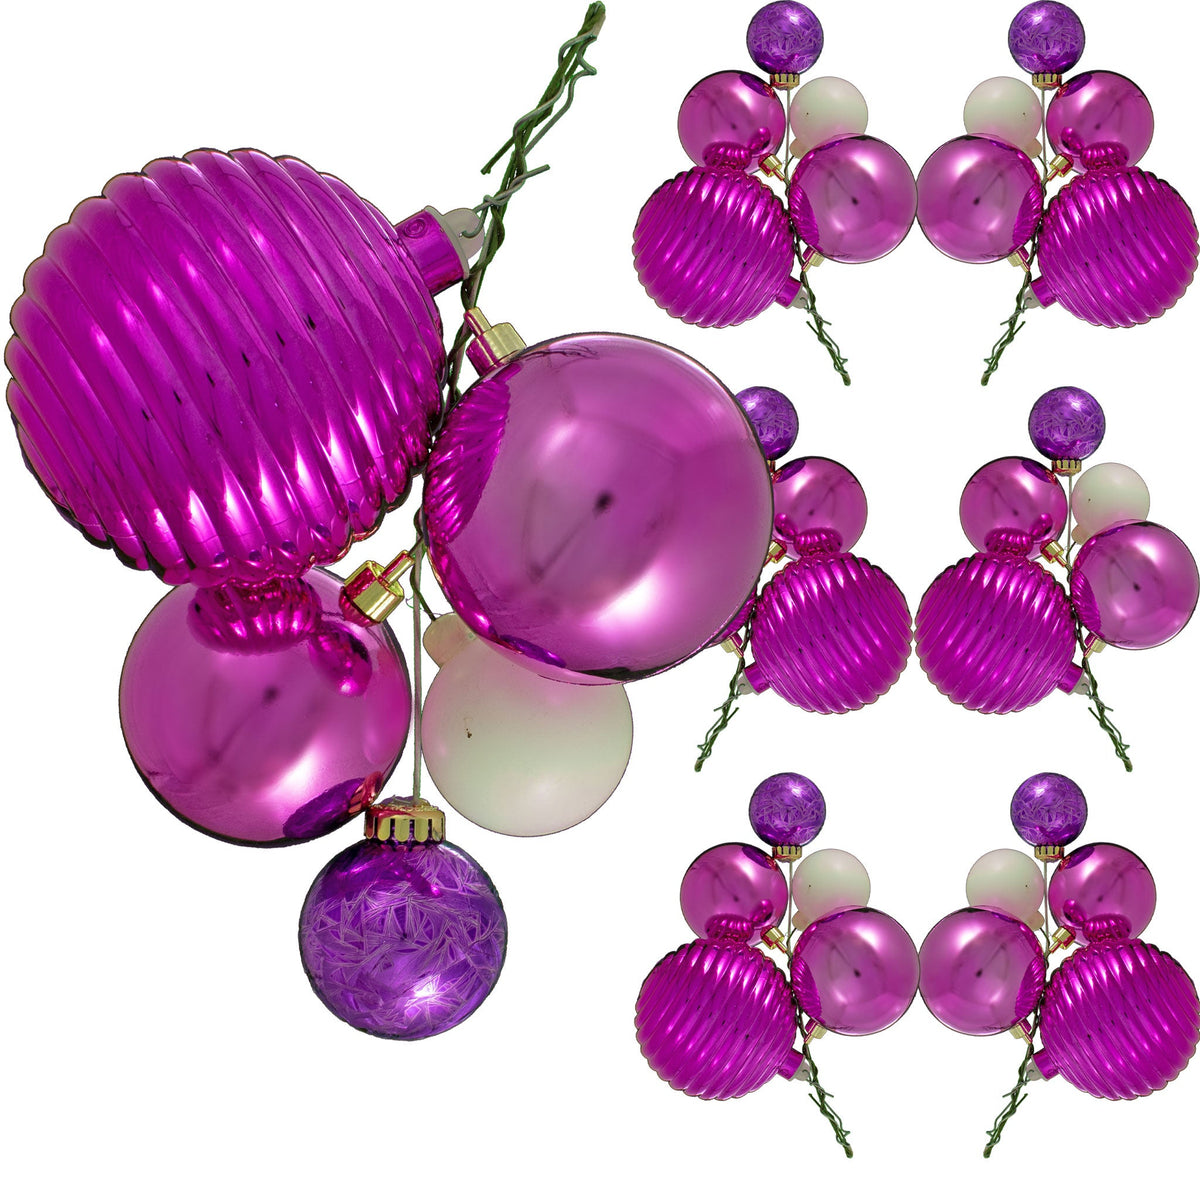 The Orinda Christmas Ball Ornament Cluster with Shiny Pink, Purple, and Matte White Ball Ornaments sold in sets of 6 from leedisplay.com